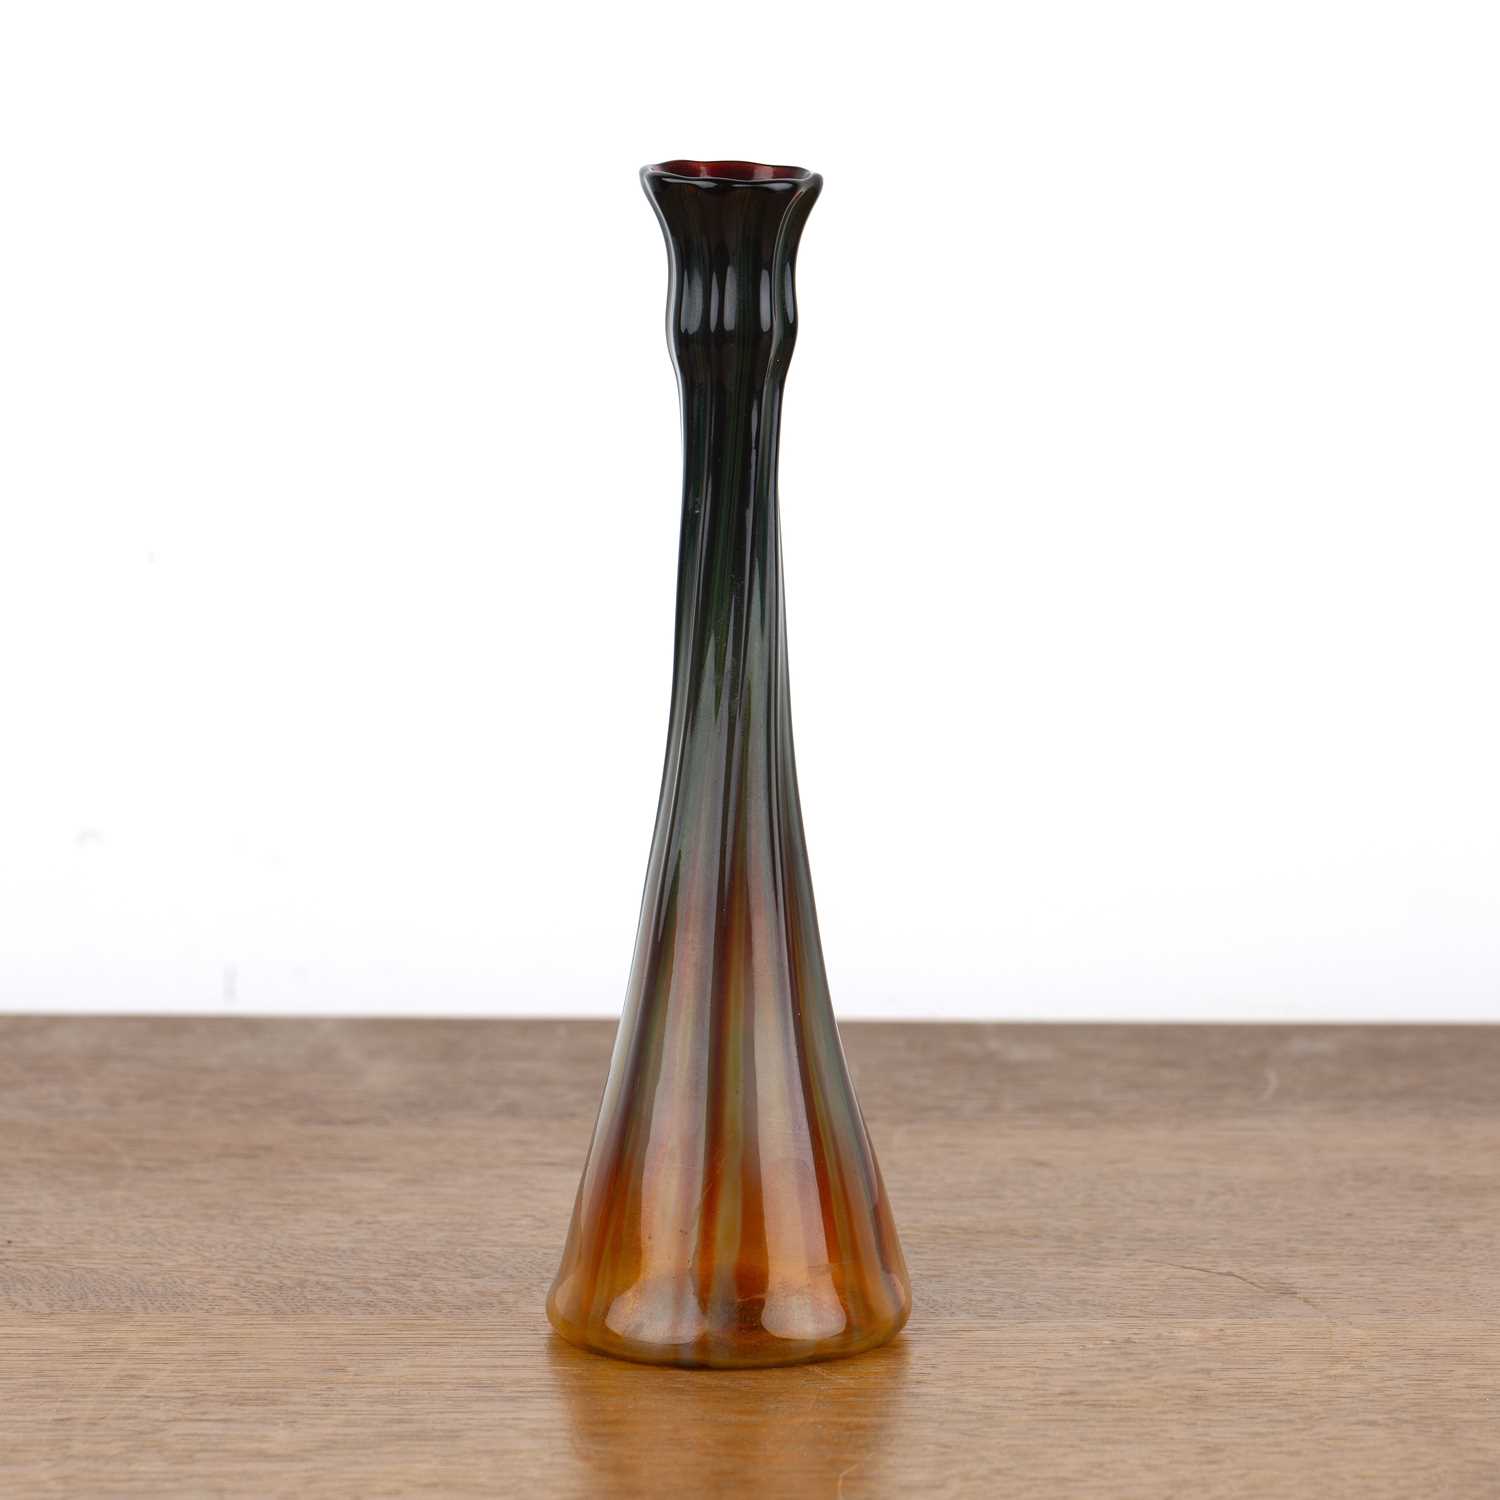 Louis Comfort Tiffany (1848-1933) glass vase, signed and numbered 'L. C. T K1562' to the base, - Image 2 of 3